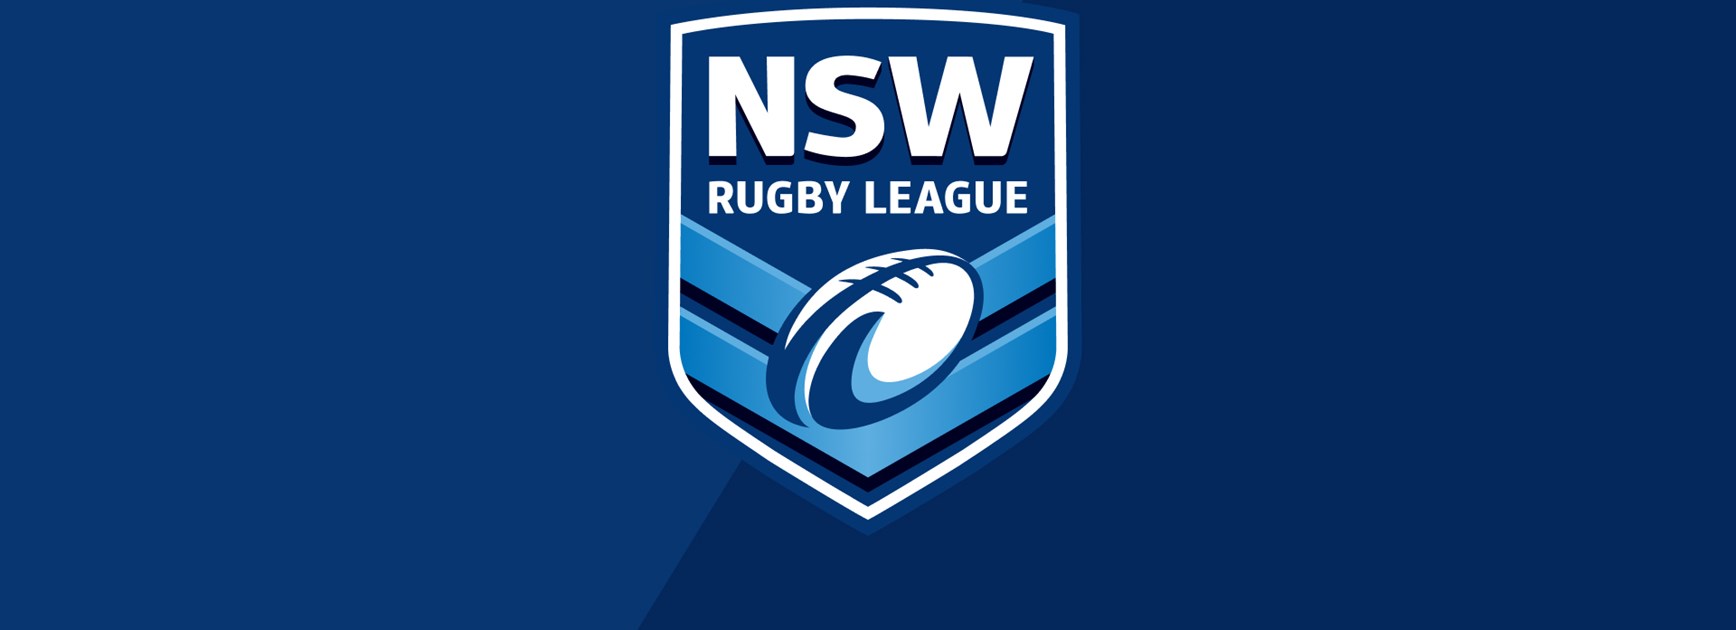 NSWRL Board has new Chair and Directors